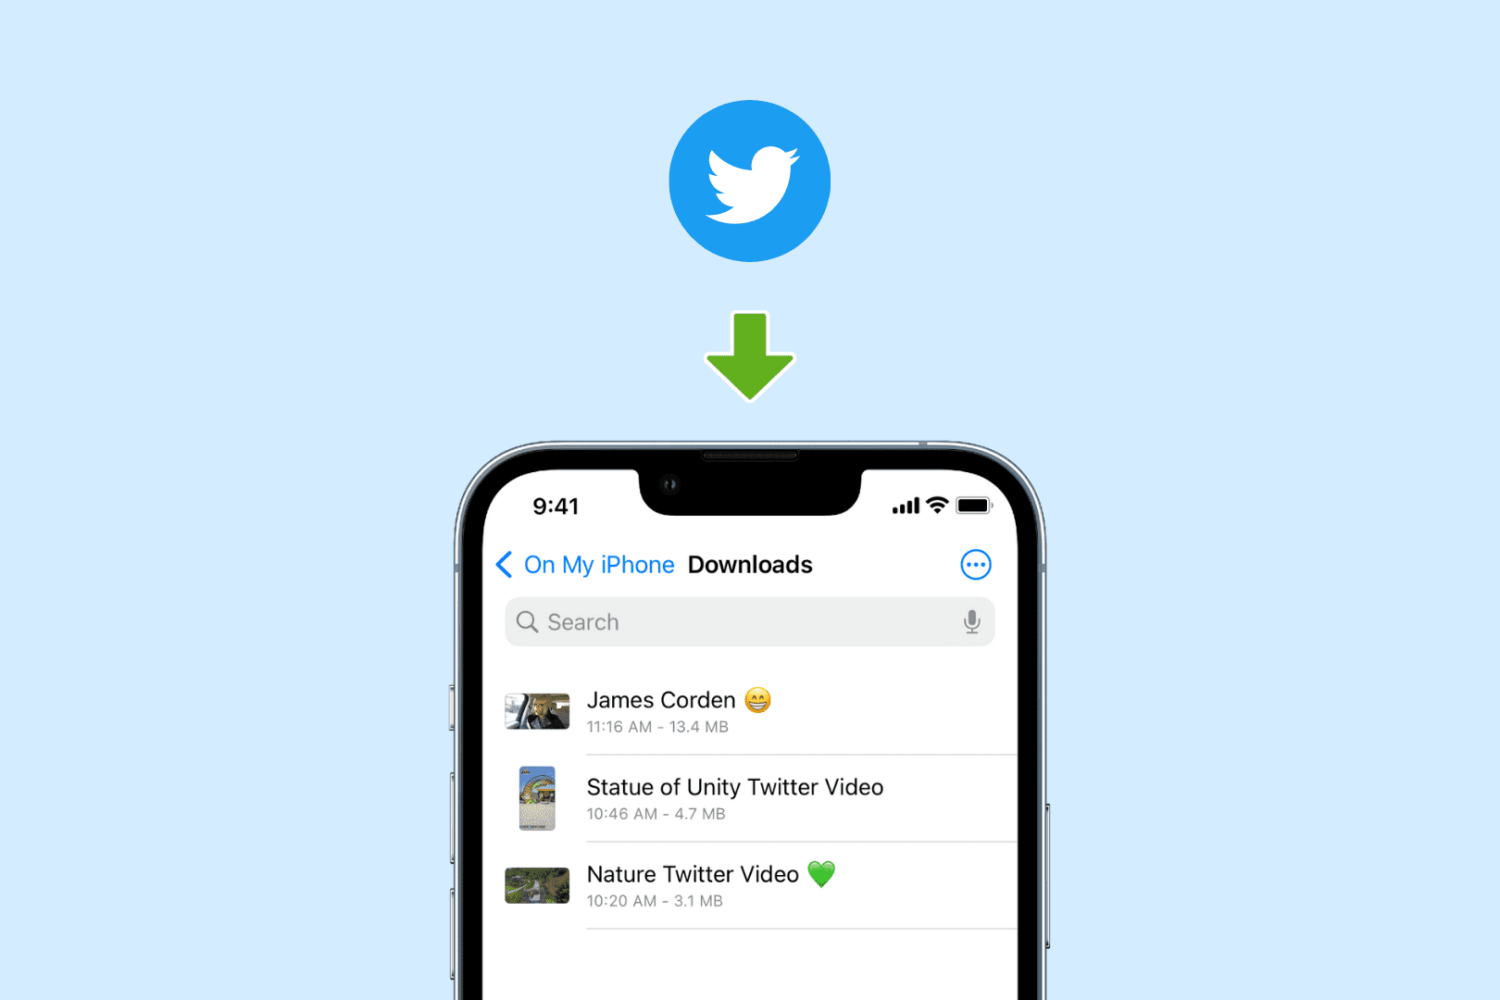 How to download Twitter video on iPhone